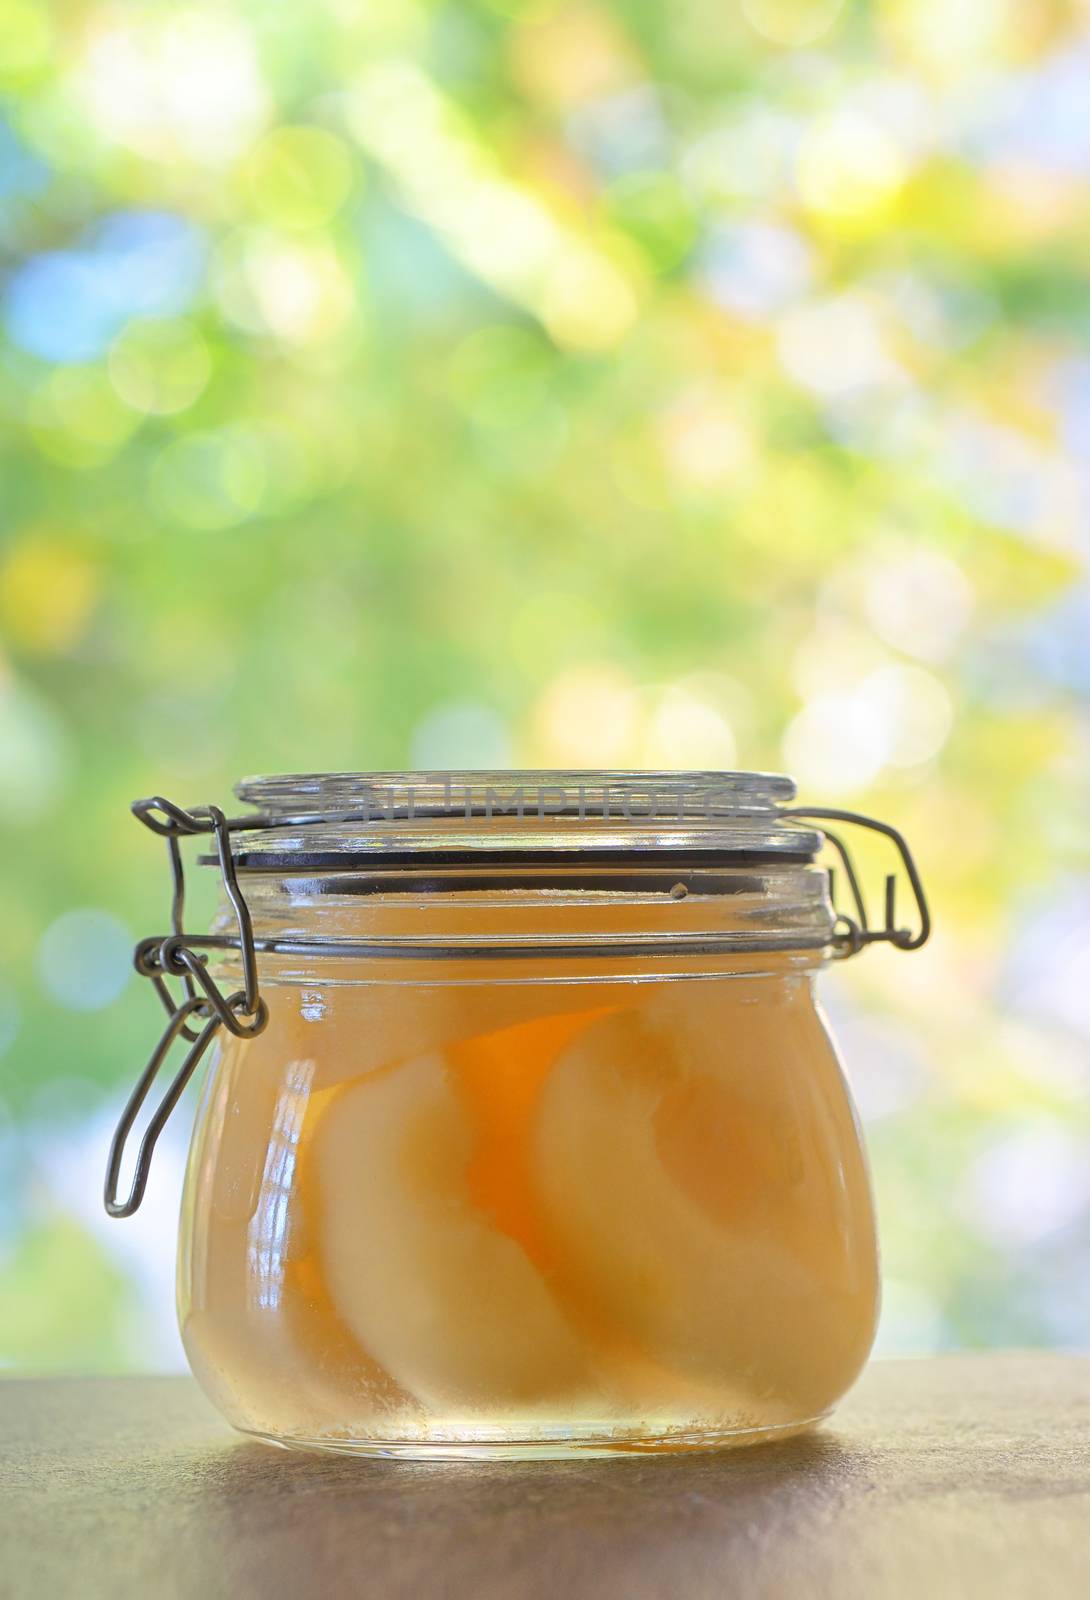 Homemade half pears compote